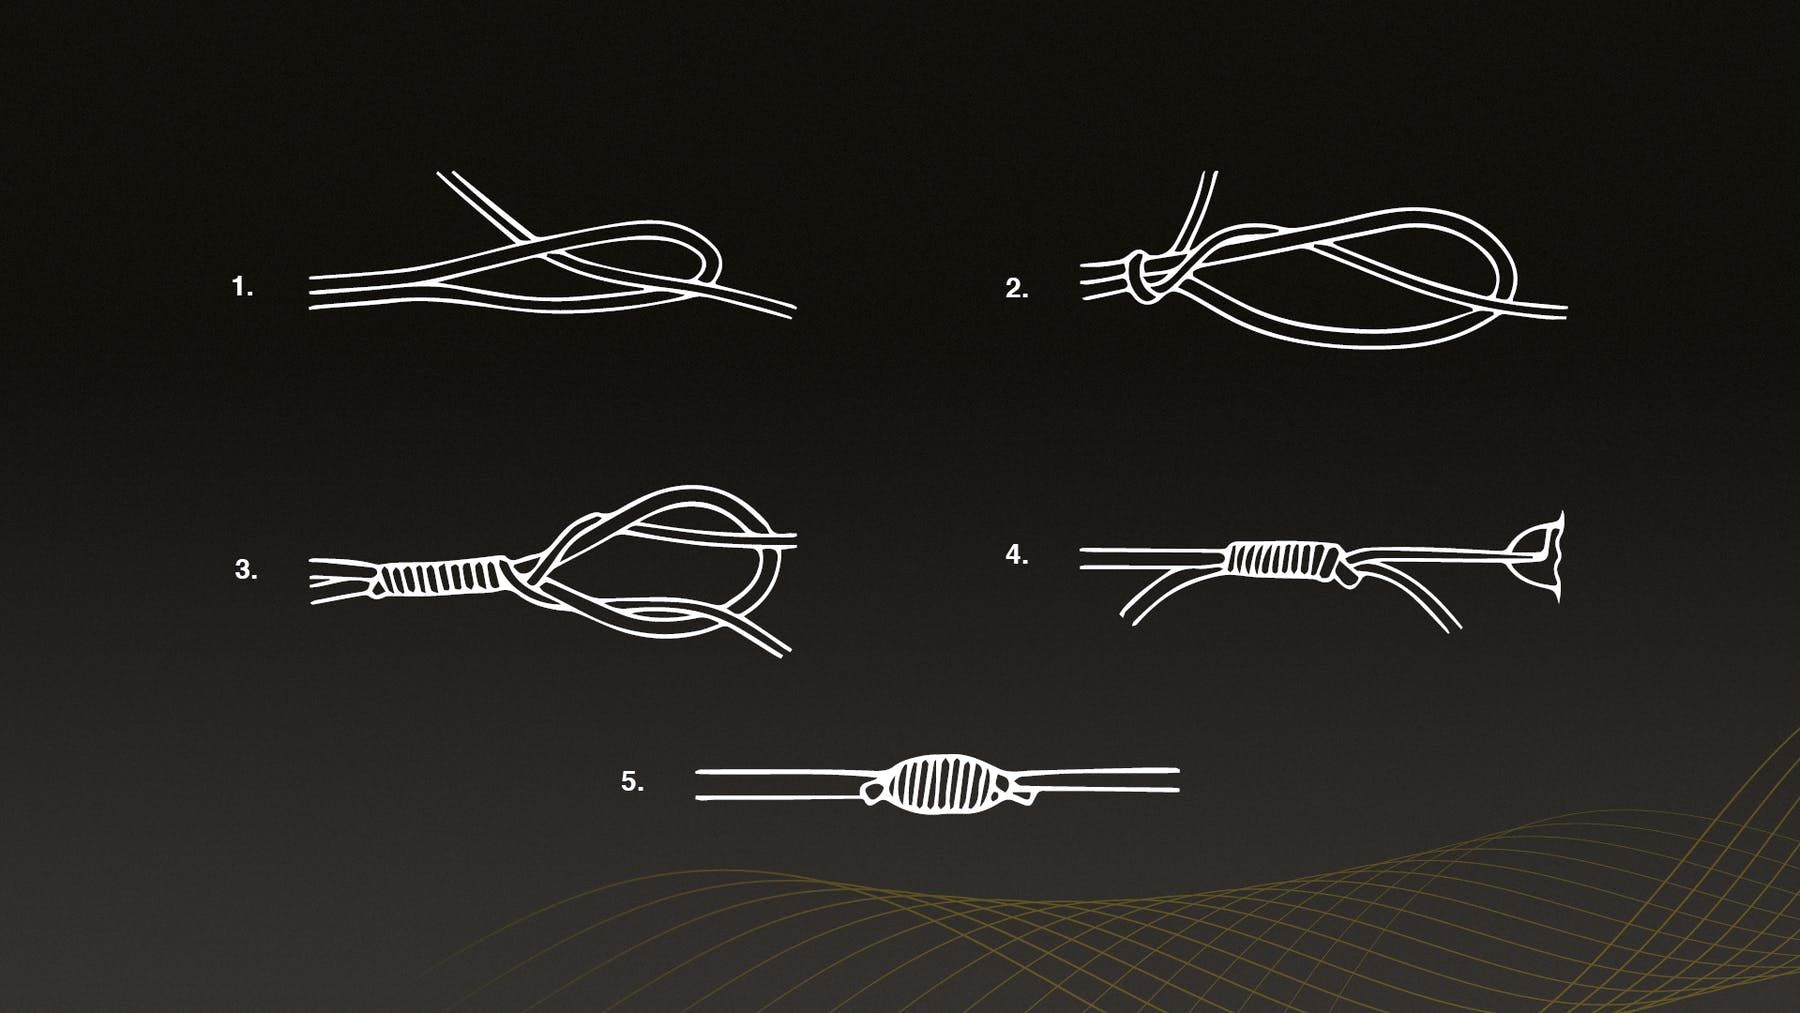 How To Tie An Albright Knot - Connect two lines together 